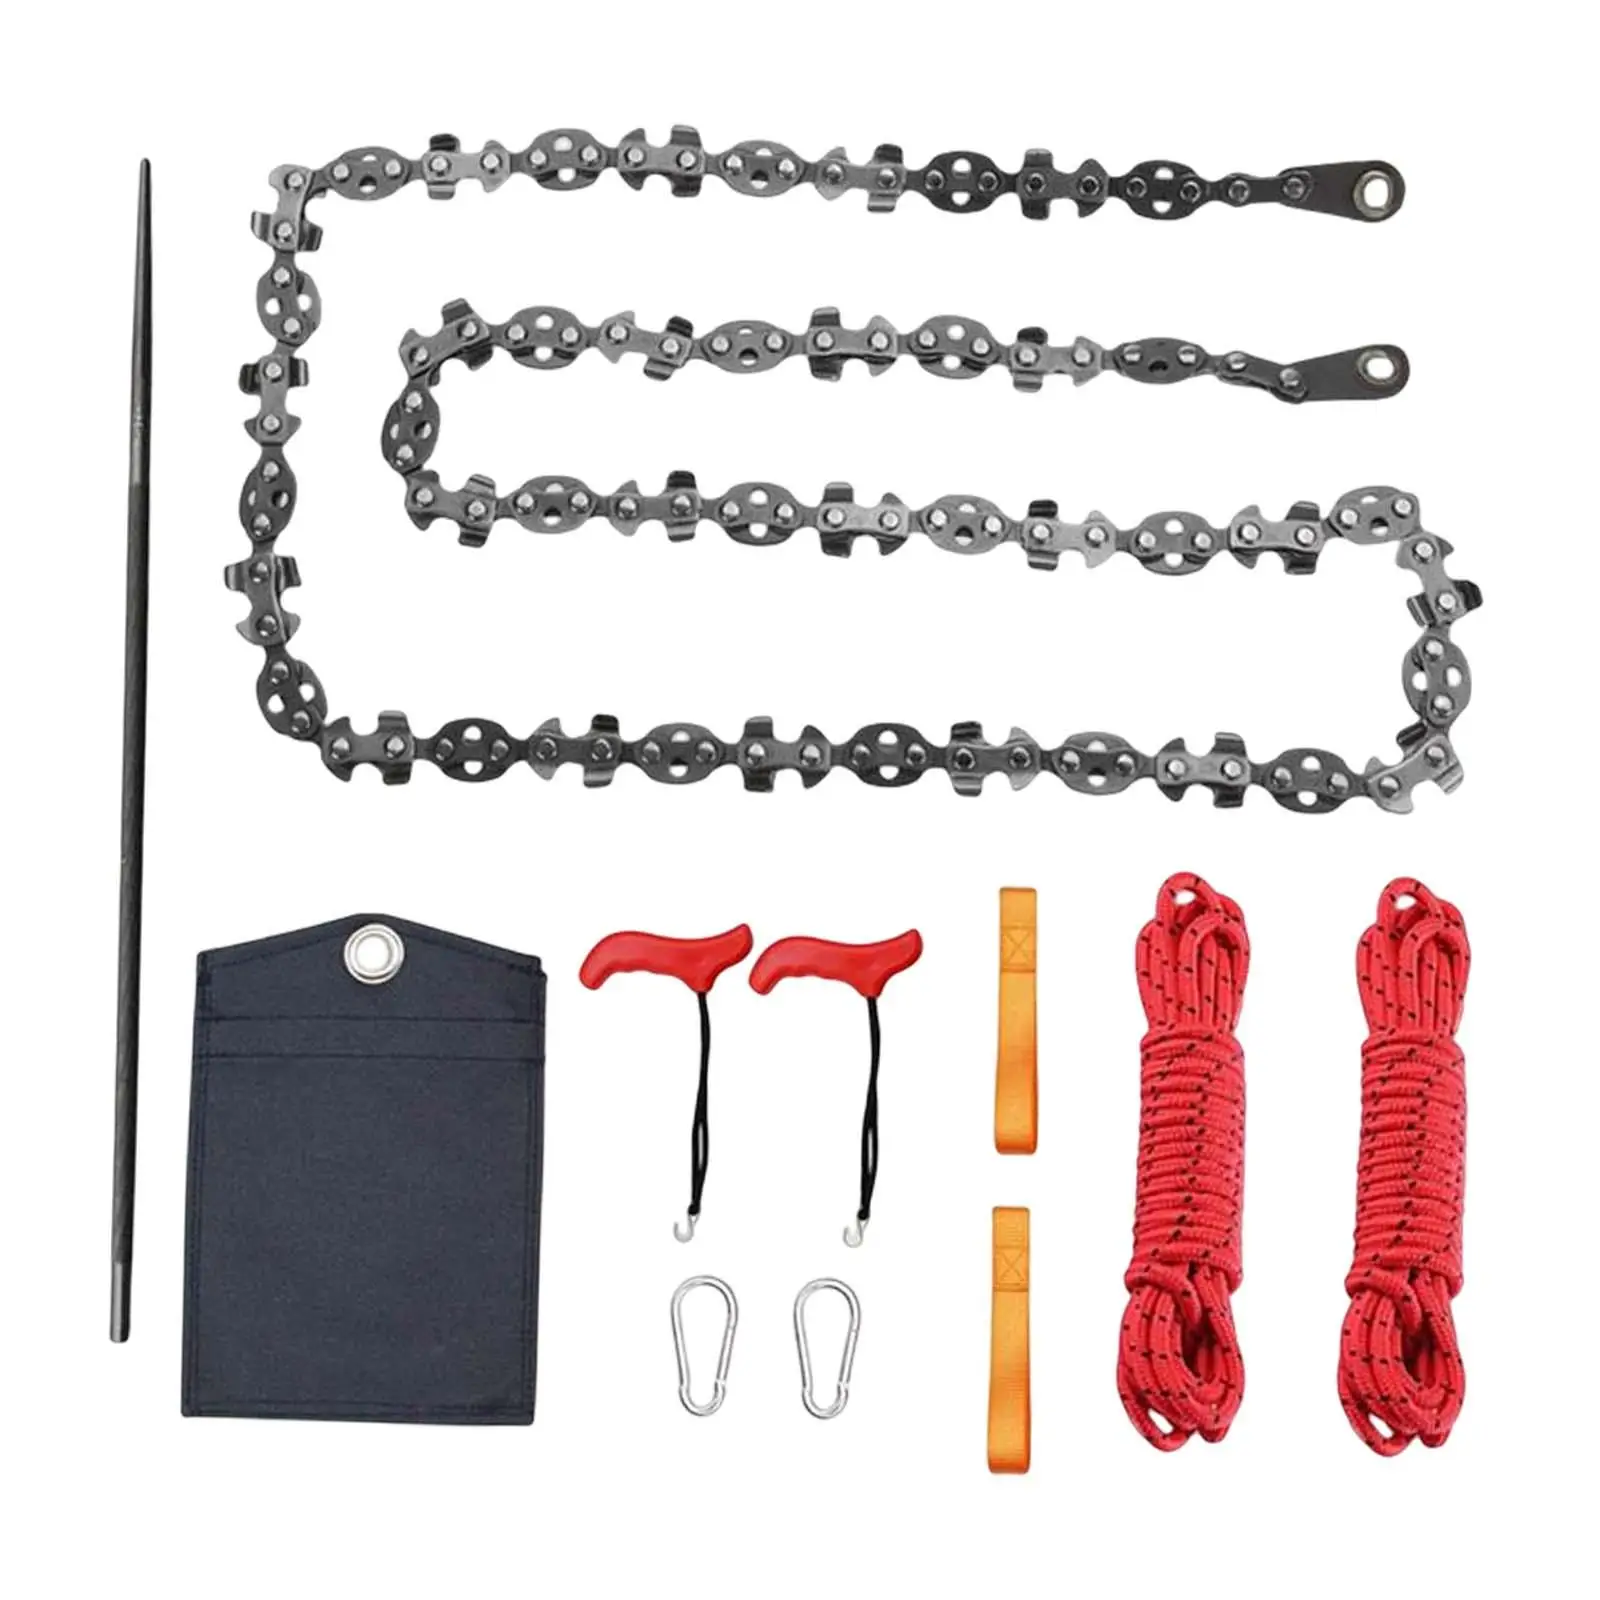 Handheld Zipper Saw with Storage Bag Emergency Saw Pocket Hand Chain Saw Wire Saw for Gardening Outdoor Wood Cutting Camping